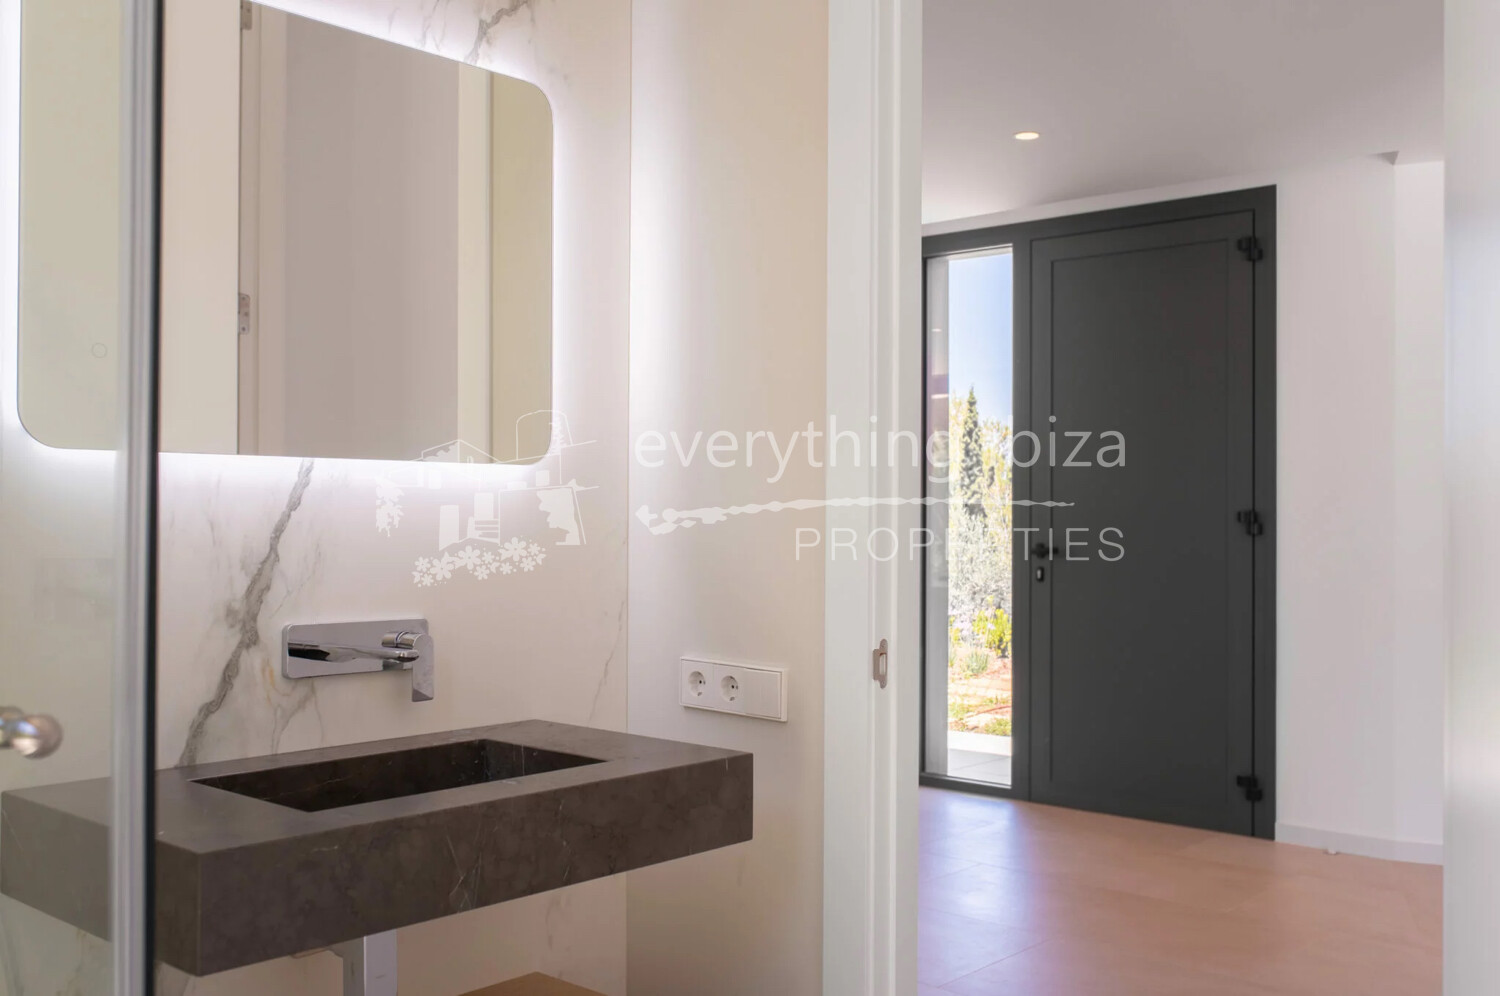 Luxurious New Villa with Two Pools Near Golf Course and Beach, ref. 1661, on sale in Ibiza by everything ibiza Properties